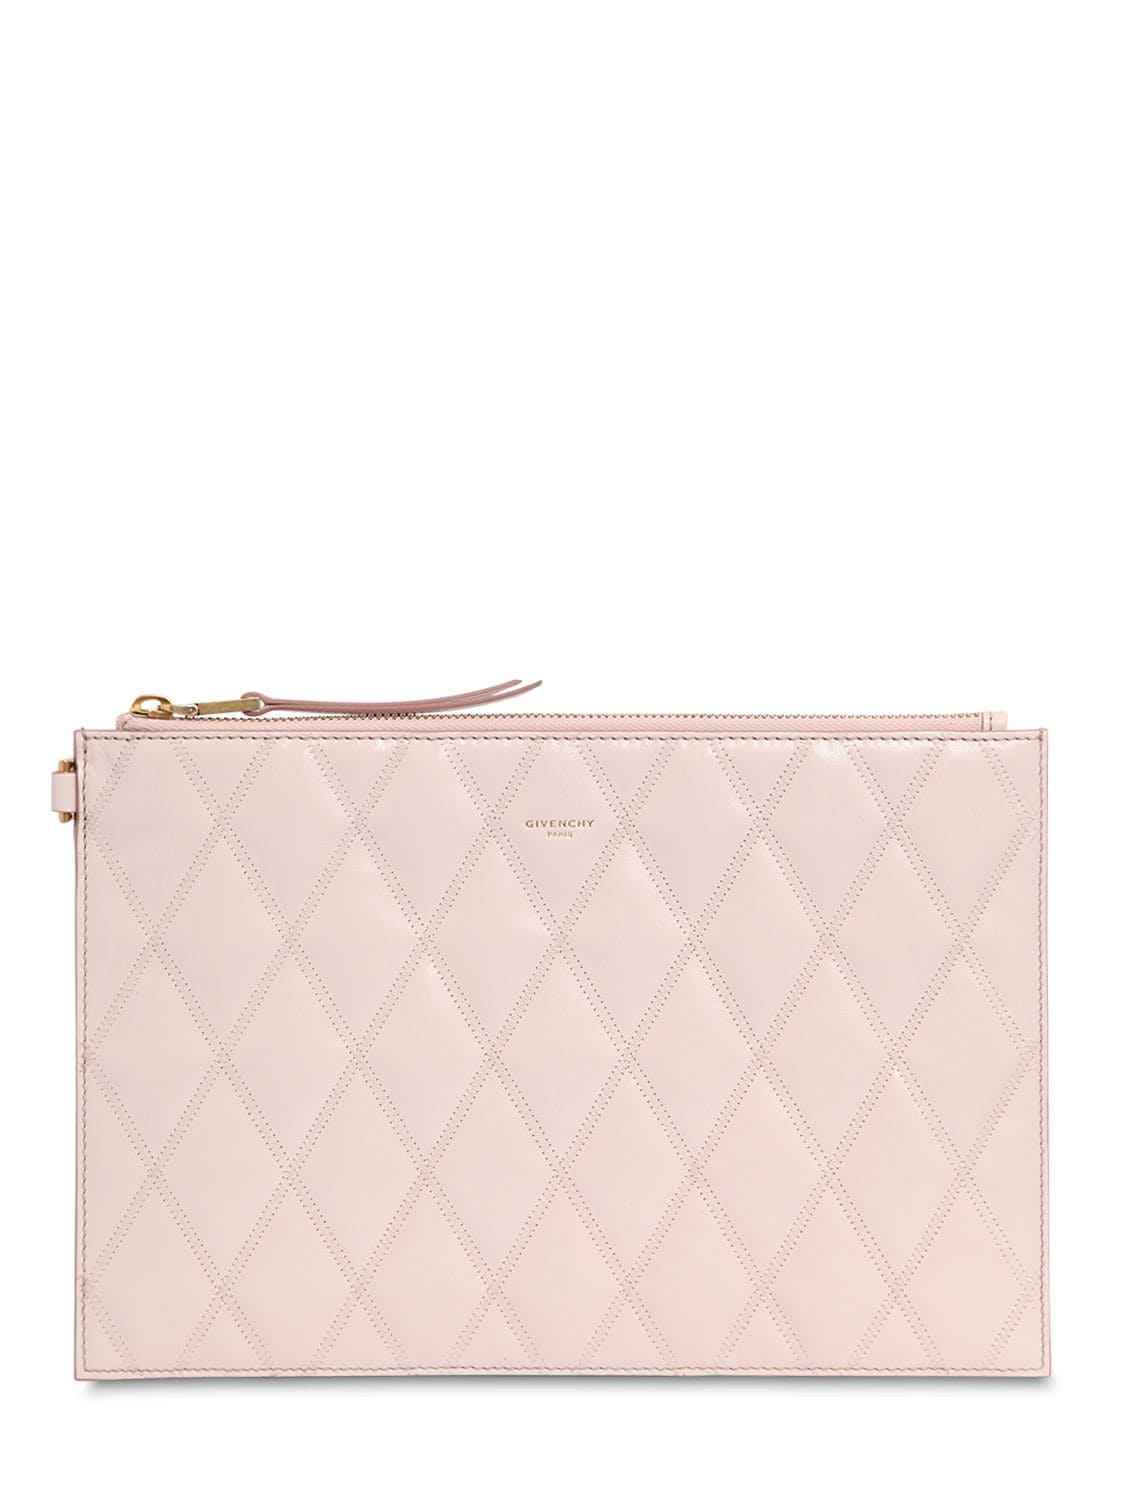 GIVENCHY QUILTED LEATHER POUCH,70IA5P025-NJGW0